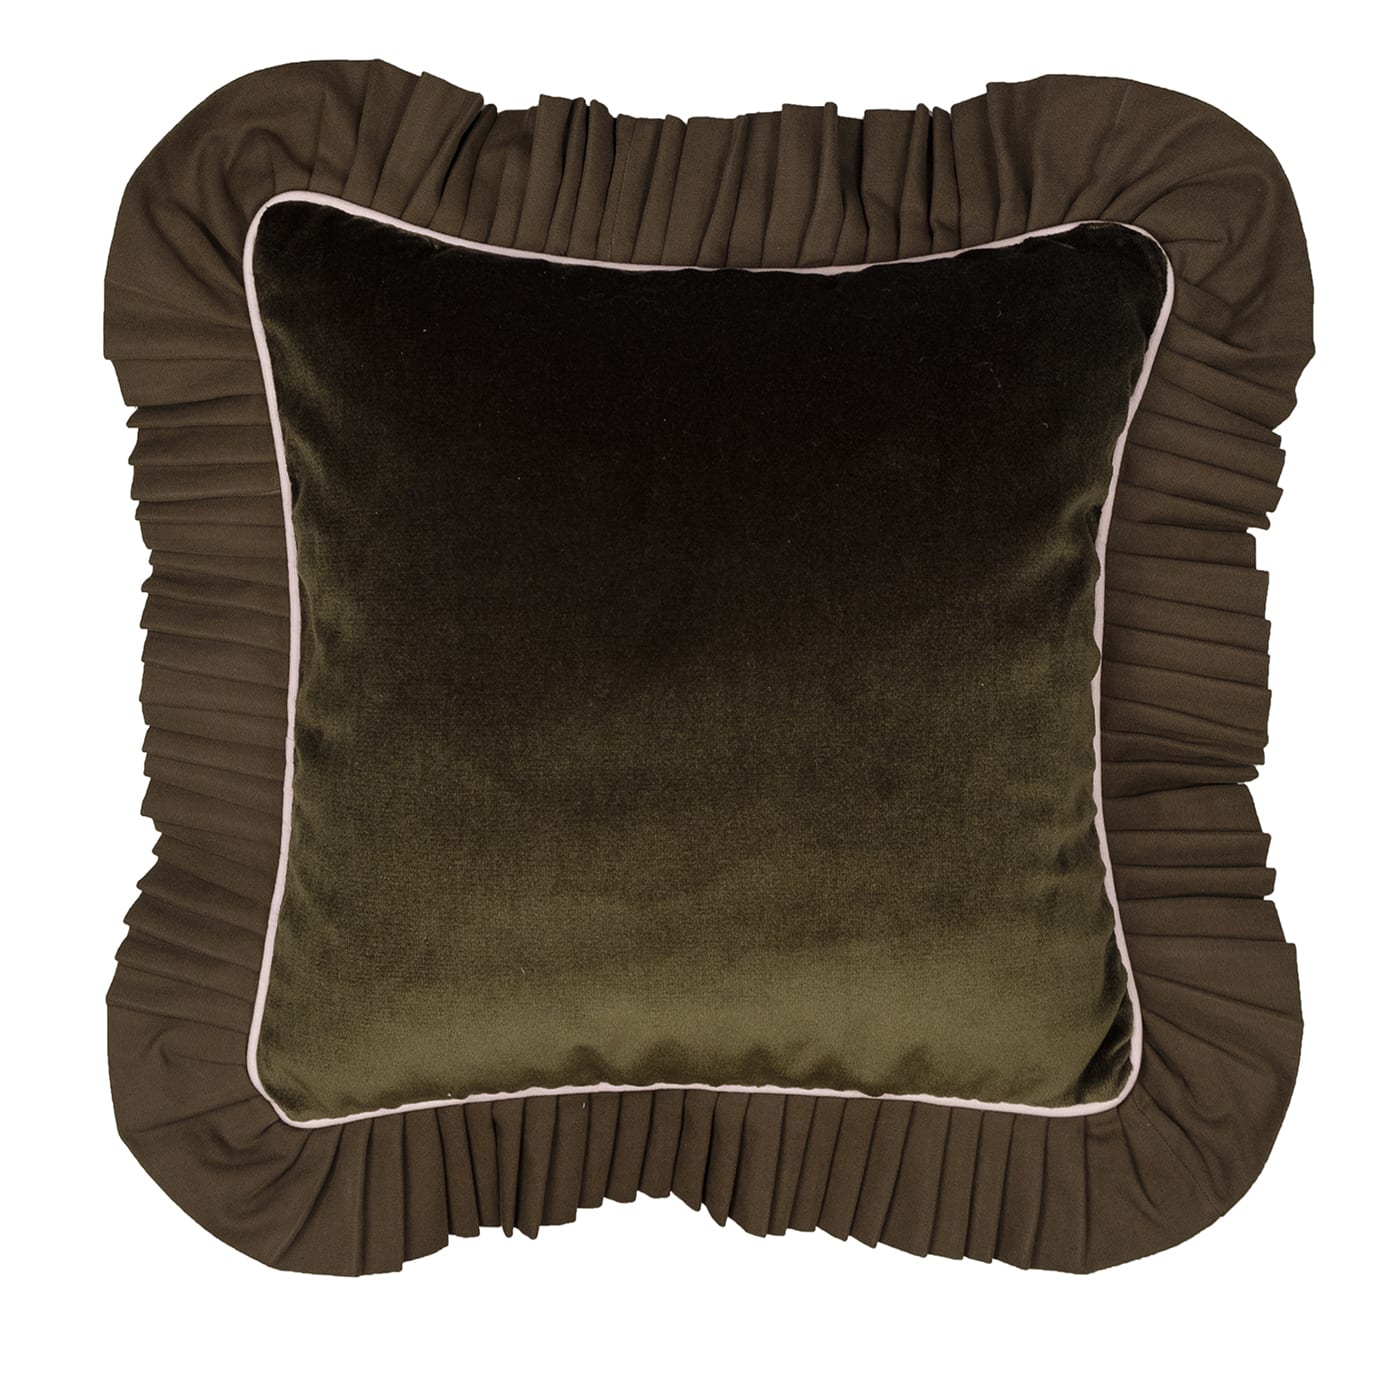 Brown Velvet Cushion Cover with Ruffle and Pink Piping - In Casa by Paboy